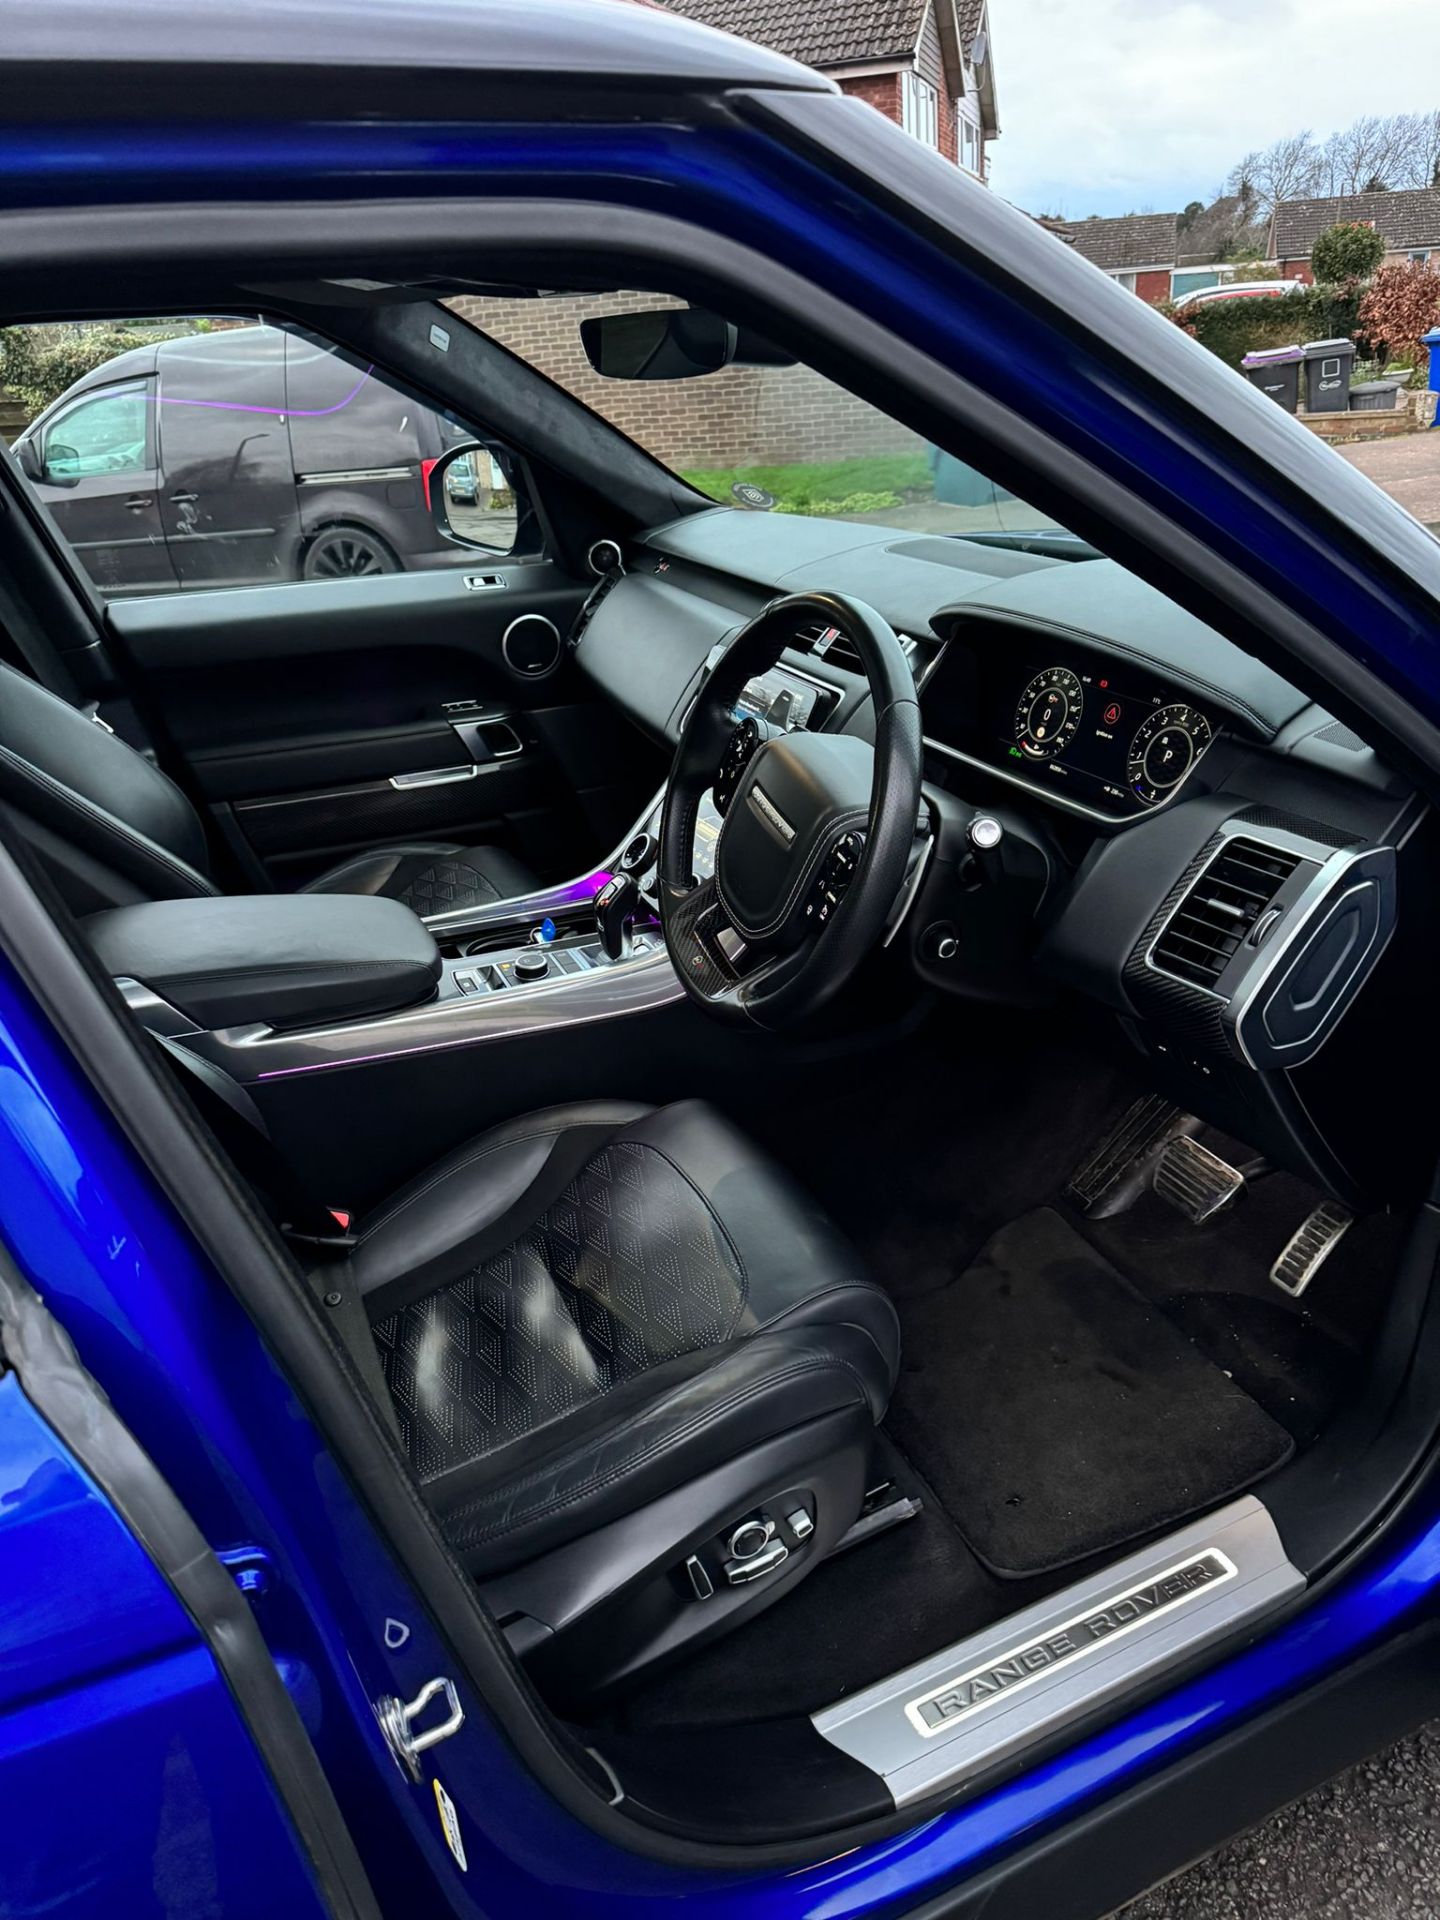 2018 18 RANGE ROVER SVR - 62K MILES WITH FULL LAND ROVER HISTORY - EXTREMELY CLEAN EXAMPLE. - Image 4 of 10